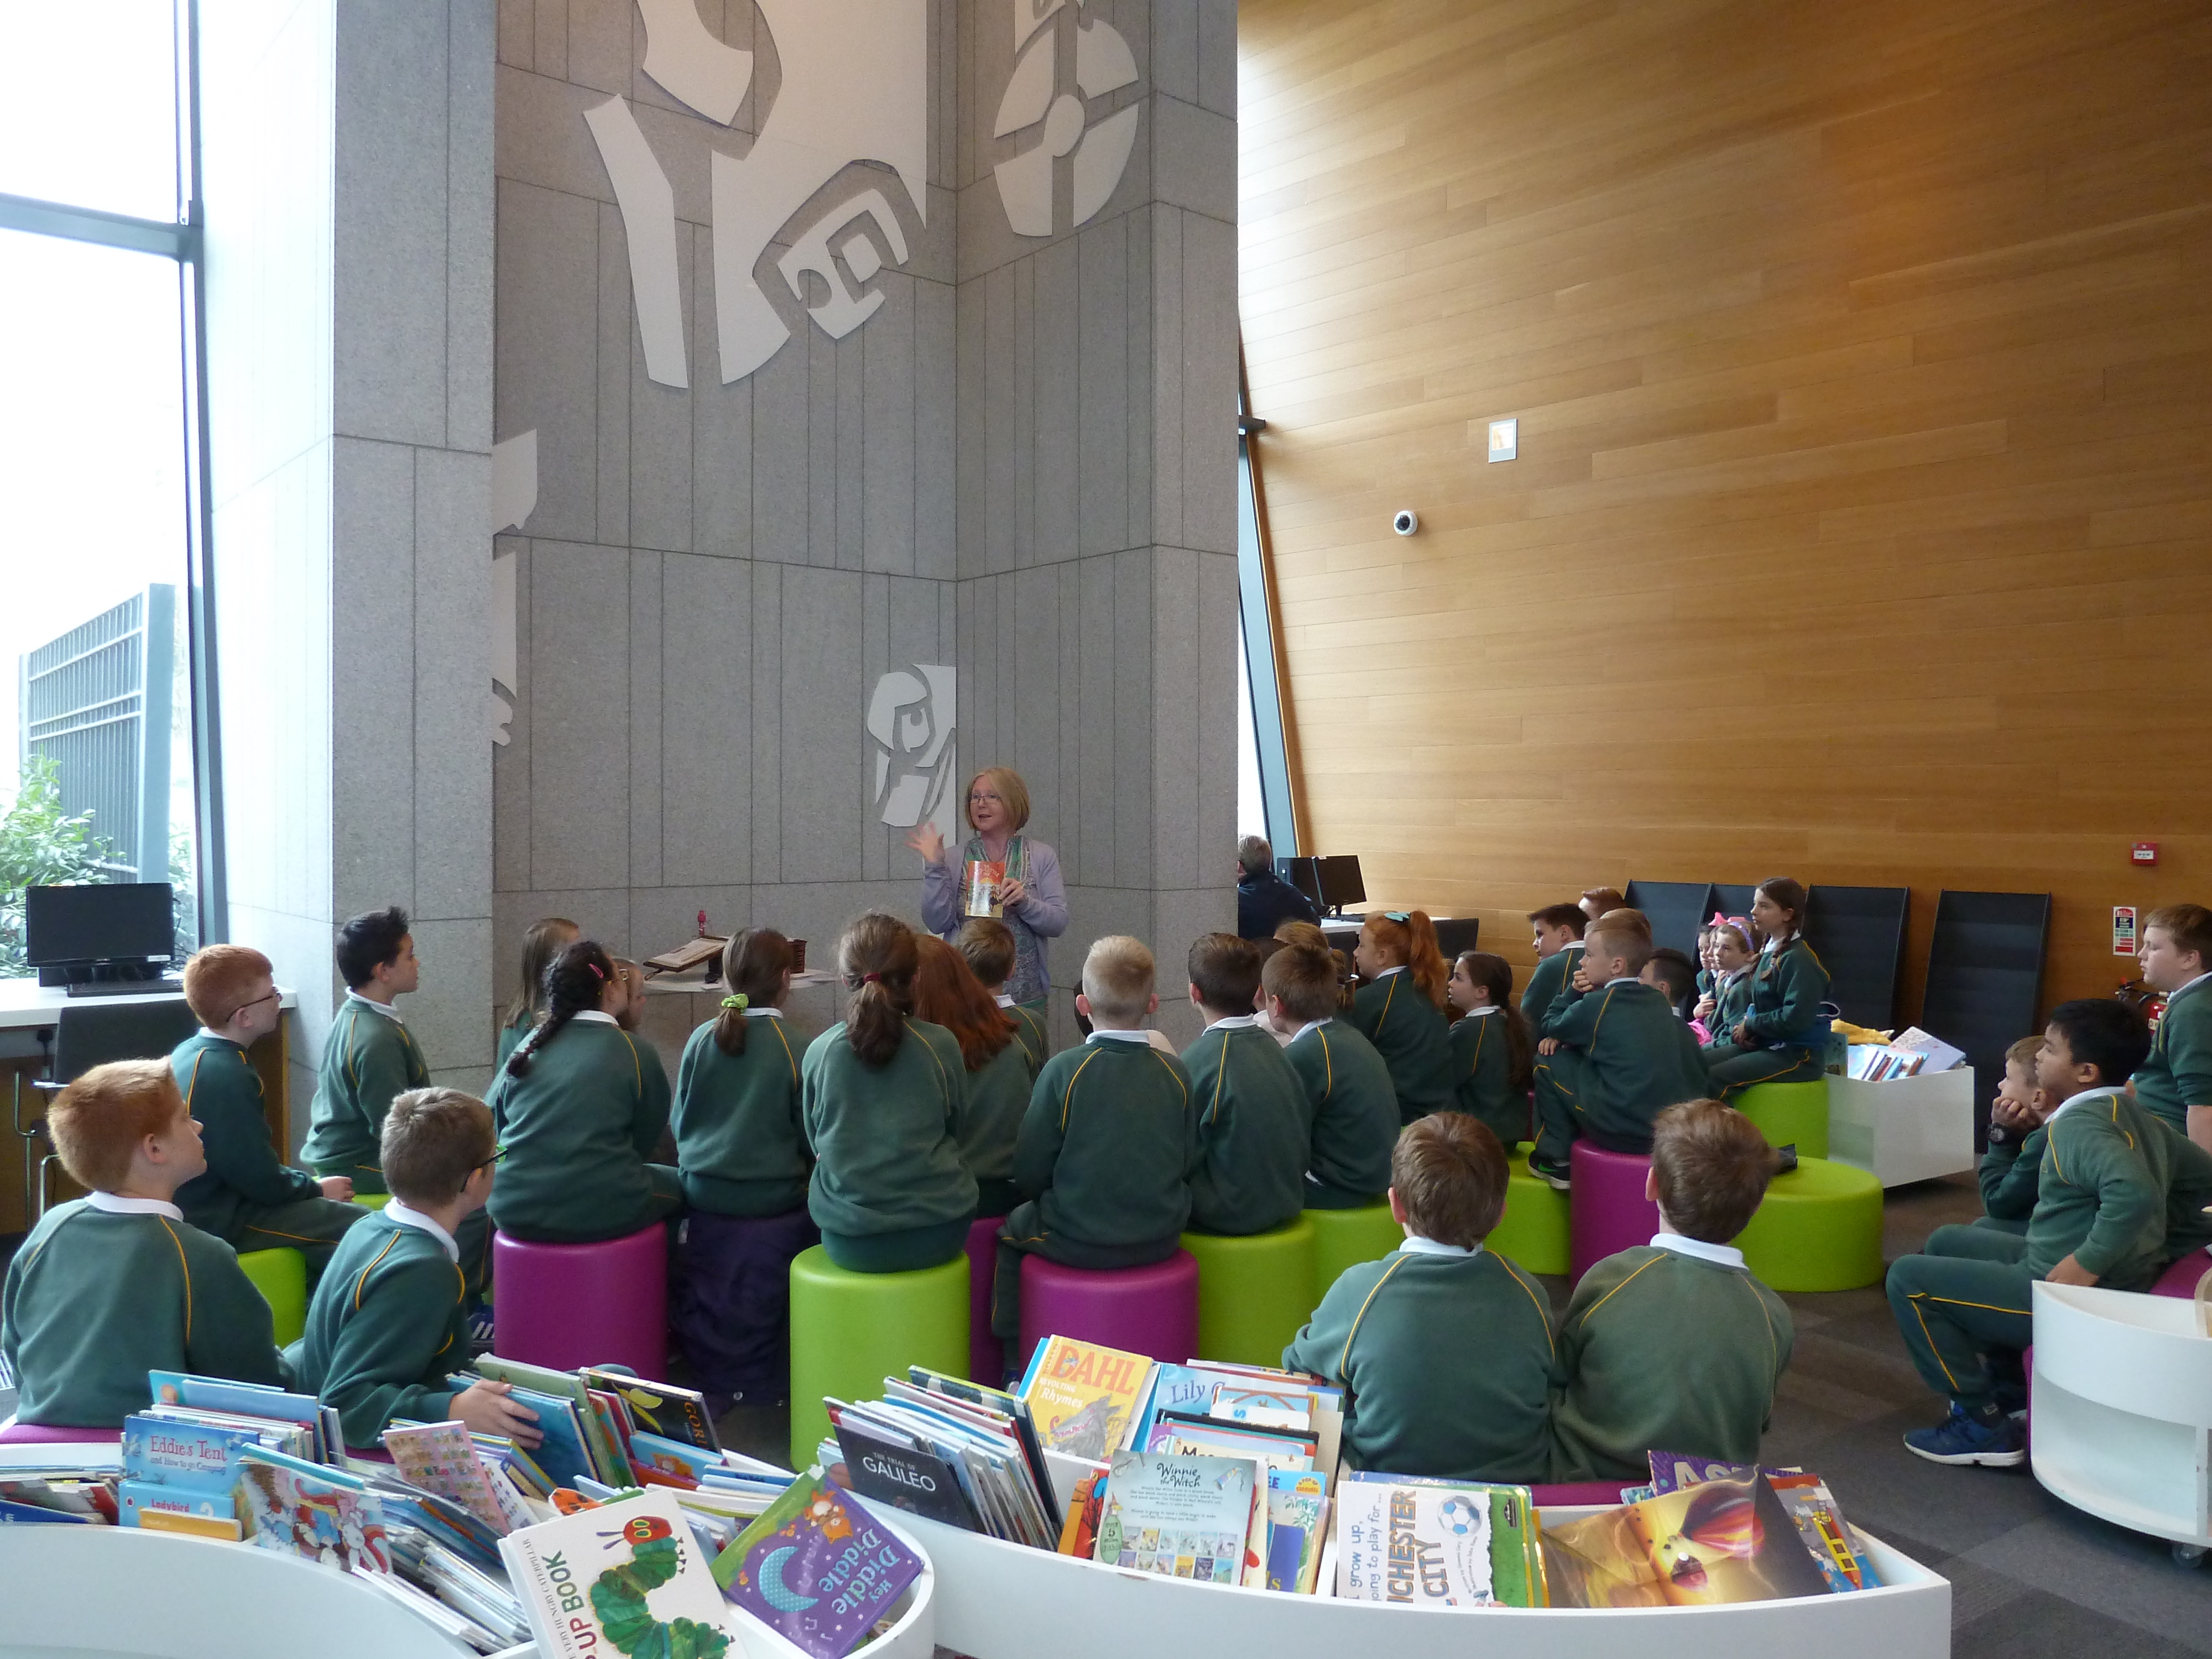 gorey-library-wexford-childrens-book-festival-the-red-letter-day-by-sp-mcardle-oct-4-2016